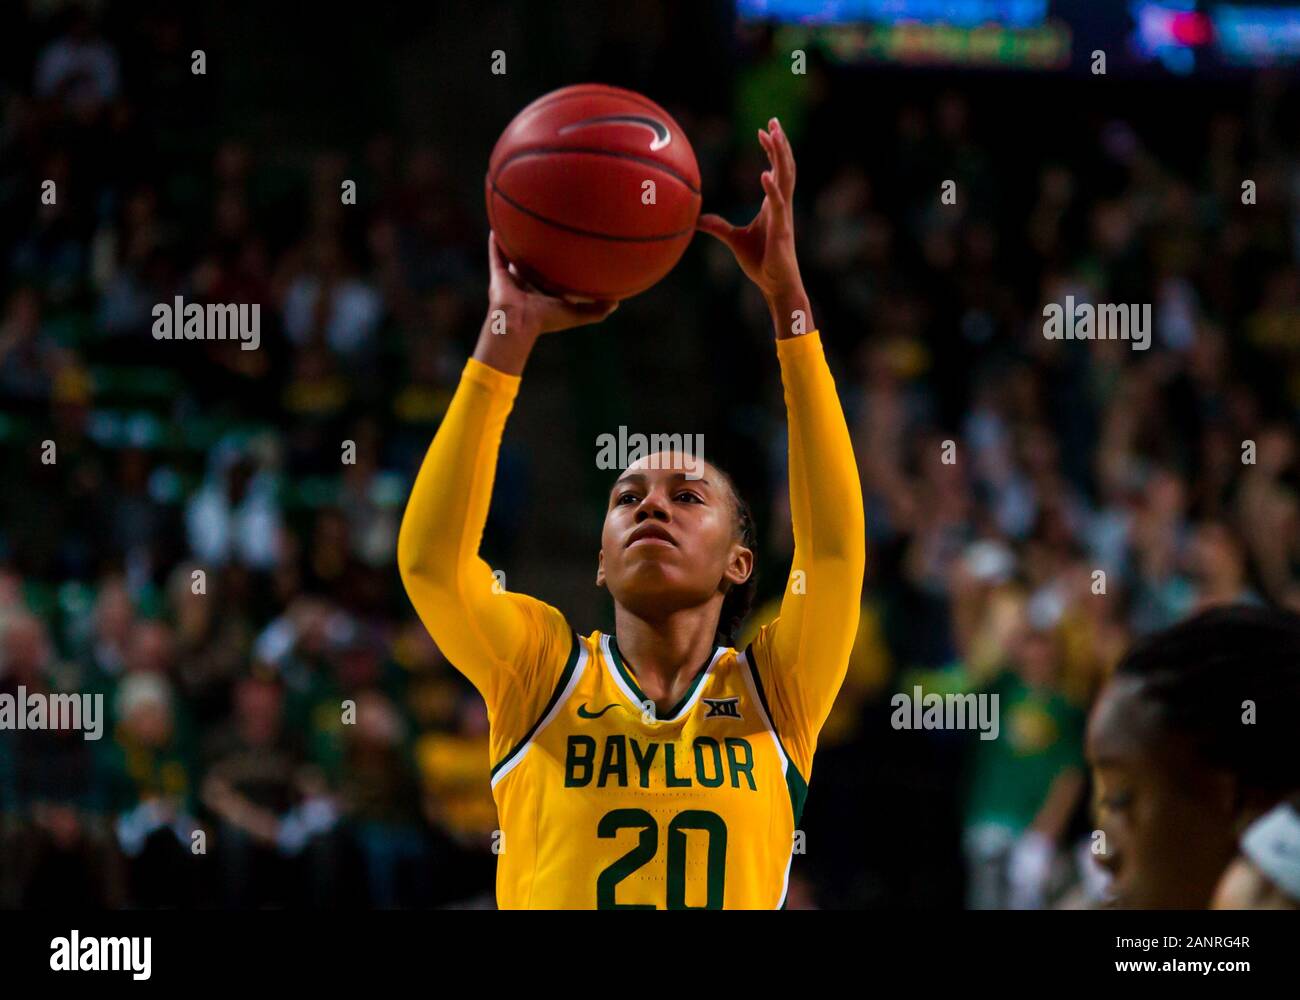 Waco, Texas, USA. 18th Jan, 2020. Baylor Lady Bears guard Juicy Landrum (20) shoots a free throw during the 2nd half of the NCAA Women's Basketball game between West Virginia Mountaineers and the Baylor Lady Bears at The Ferrell Center in Waco, Texas. Matthew Lynch/CSM/Alamy Live News Stock Photo